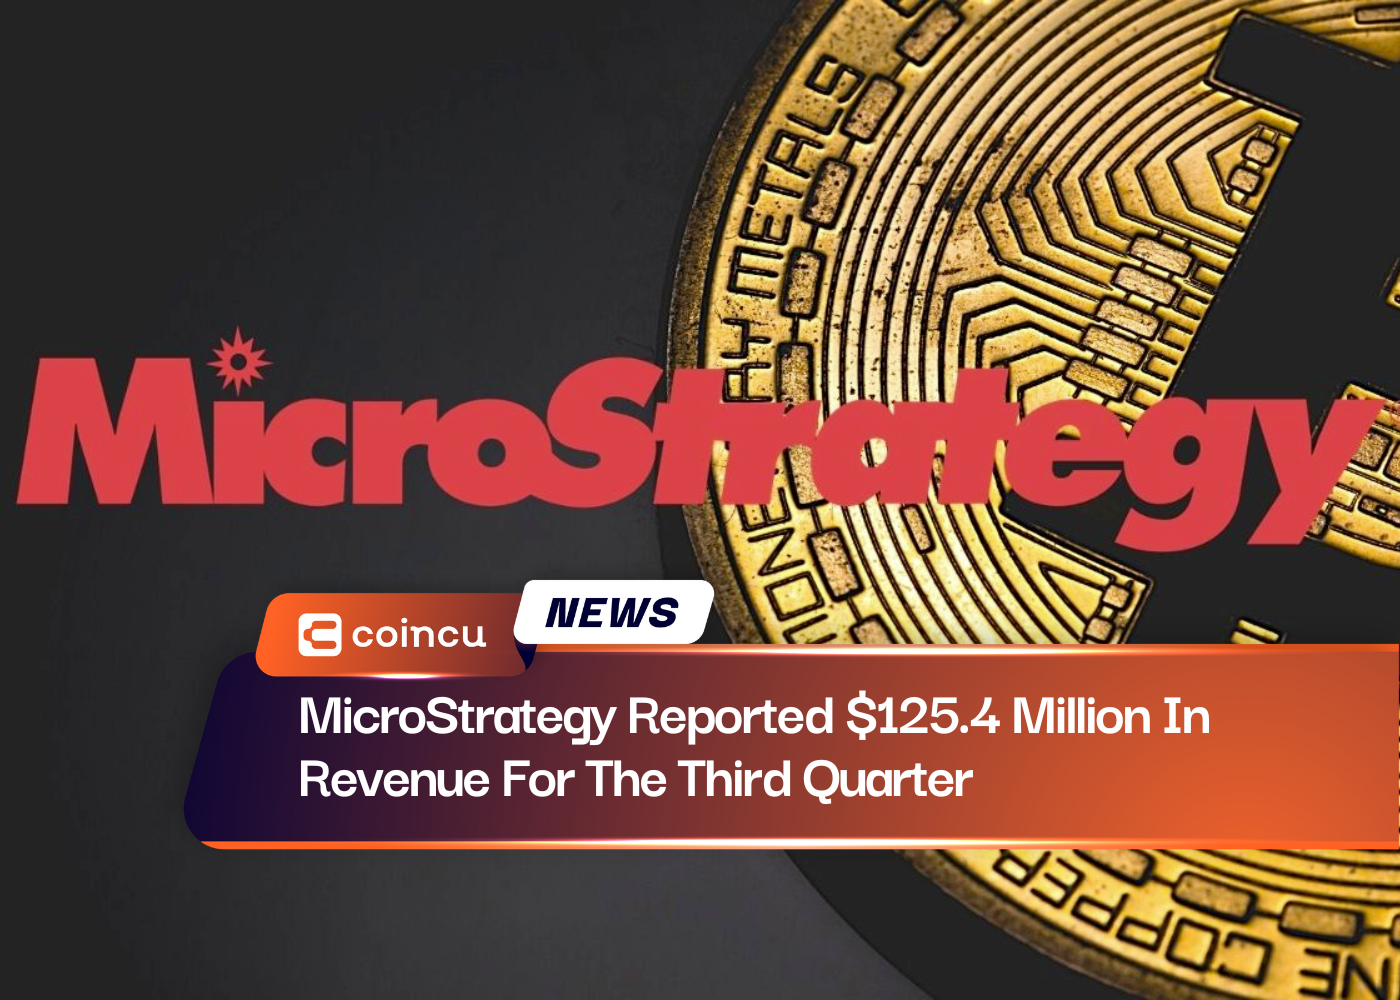 MicroStrategy Reported $125.4 Million In Revenue For The Third Quarter